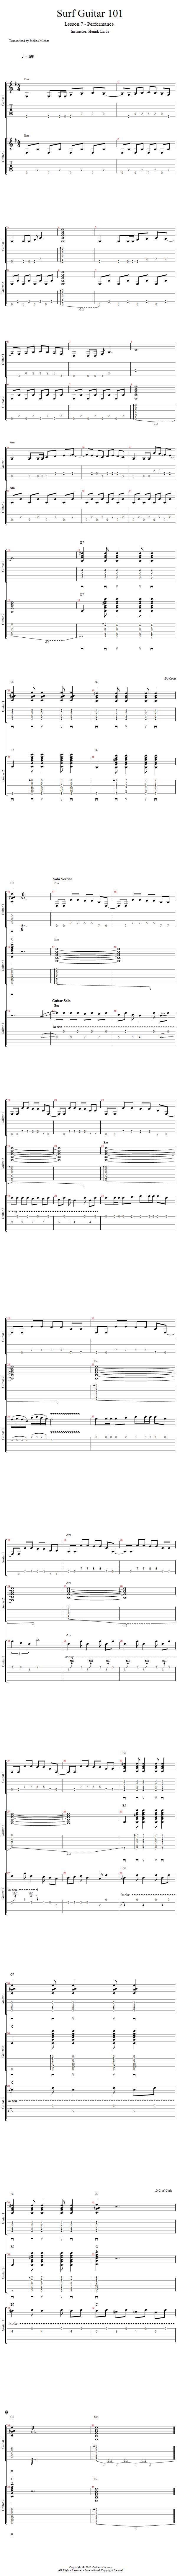 Play Along With Our Surf Song song notation